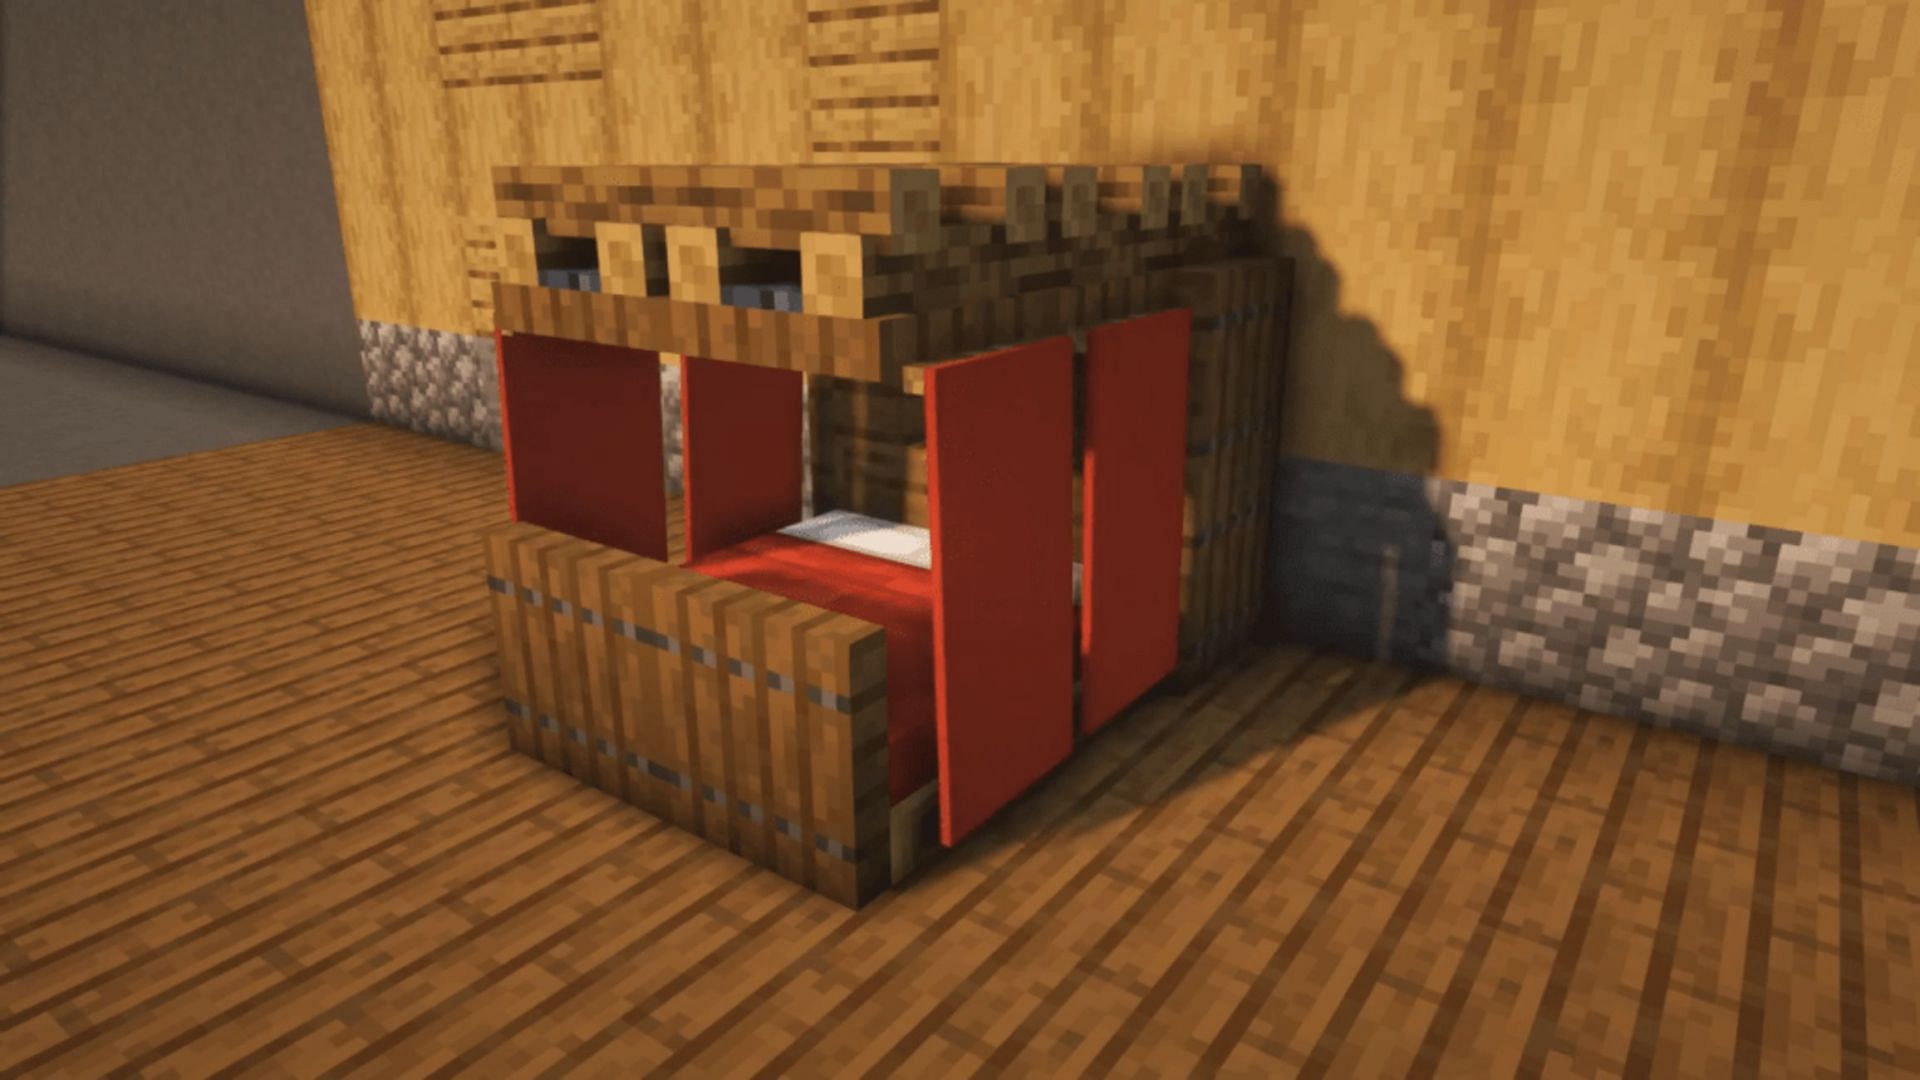 For users who like curtains on their bed, this build uses banners to do so (Image via TinyCraft/YouTube)